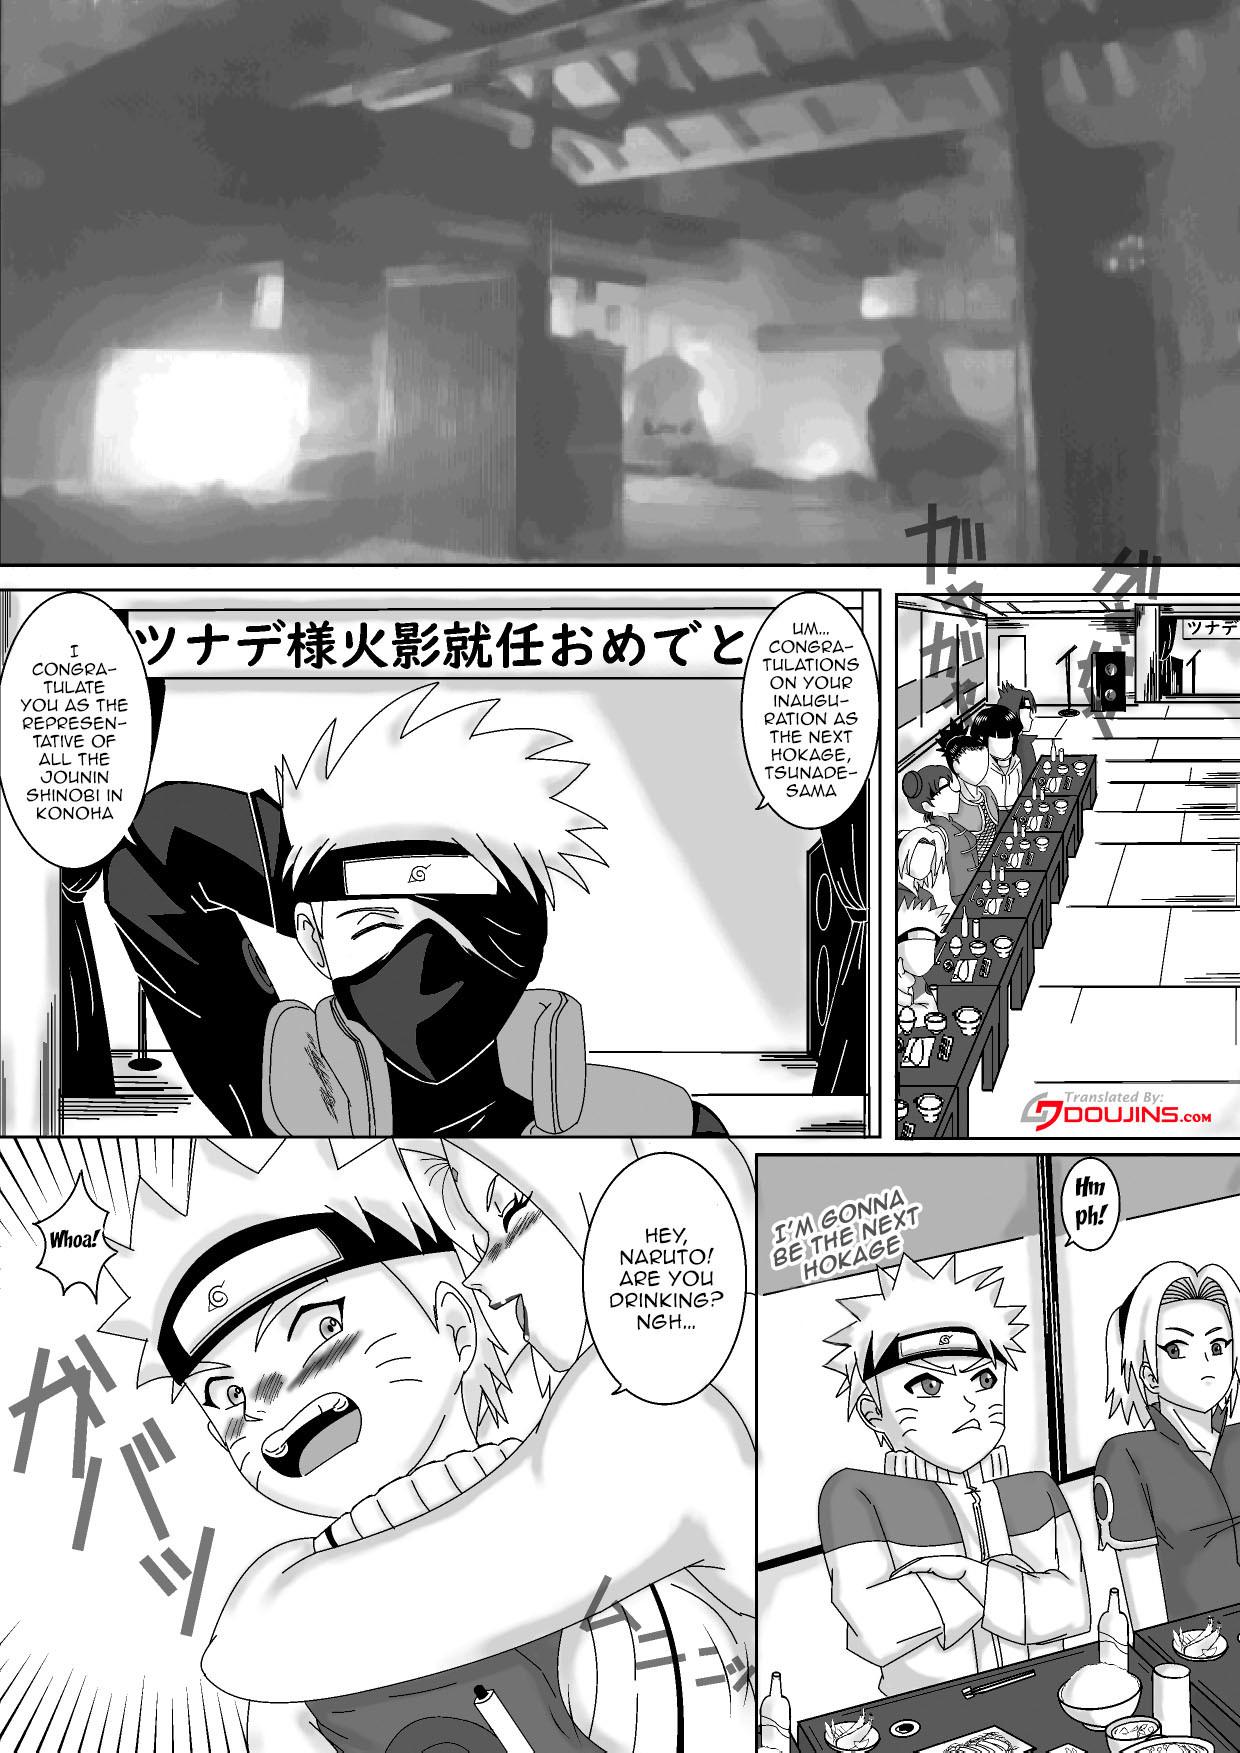 Rough Porn Nomisugite Deisui Shita BBA to Yarimakutta Ken!! | The Case Of Having Sex With This Old Lady After She Got Herself Really Drunk - Naruto Pasivo - Page 2